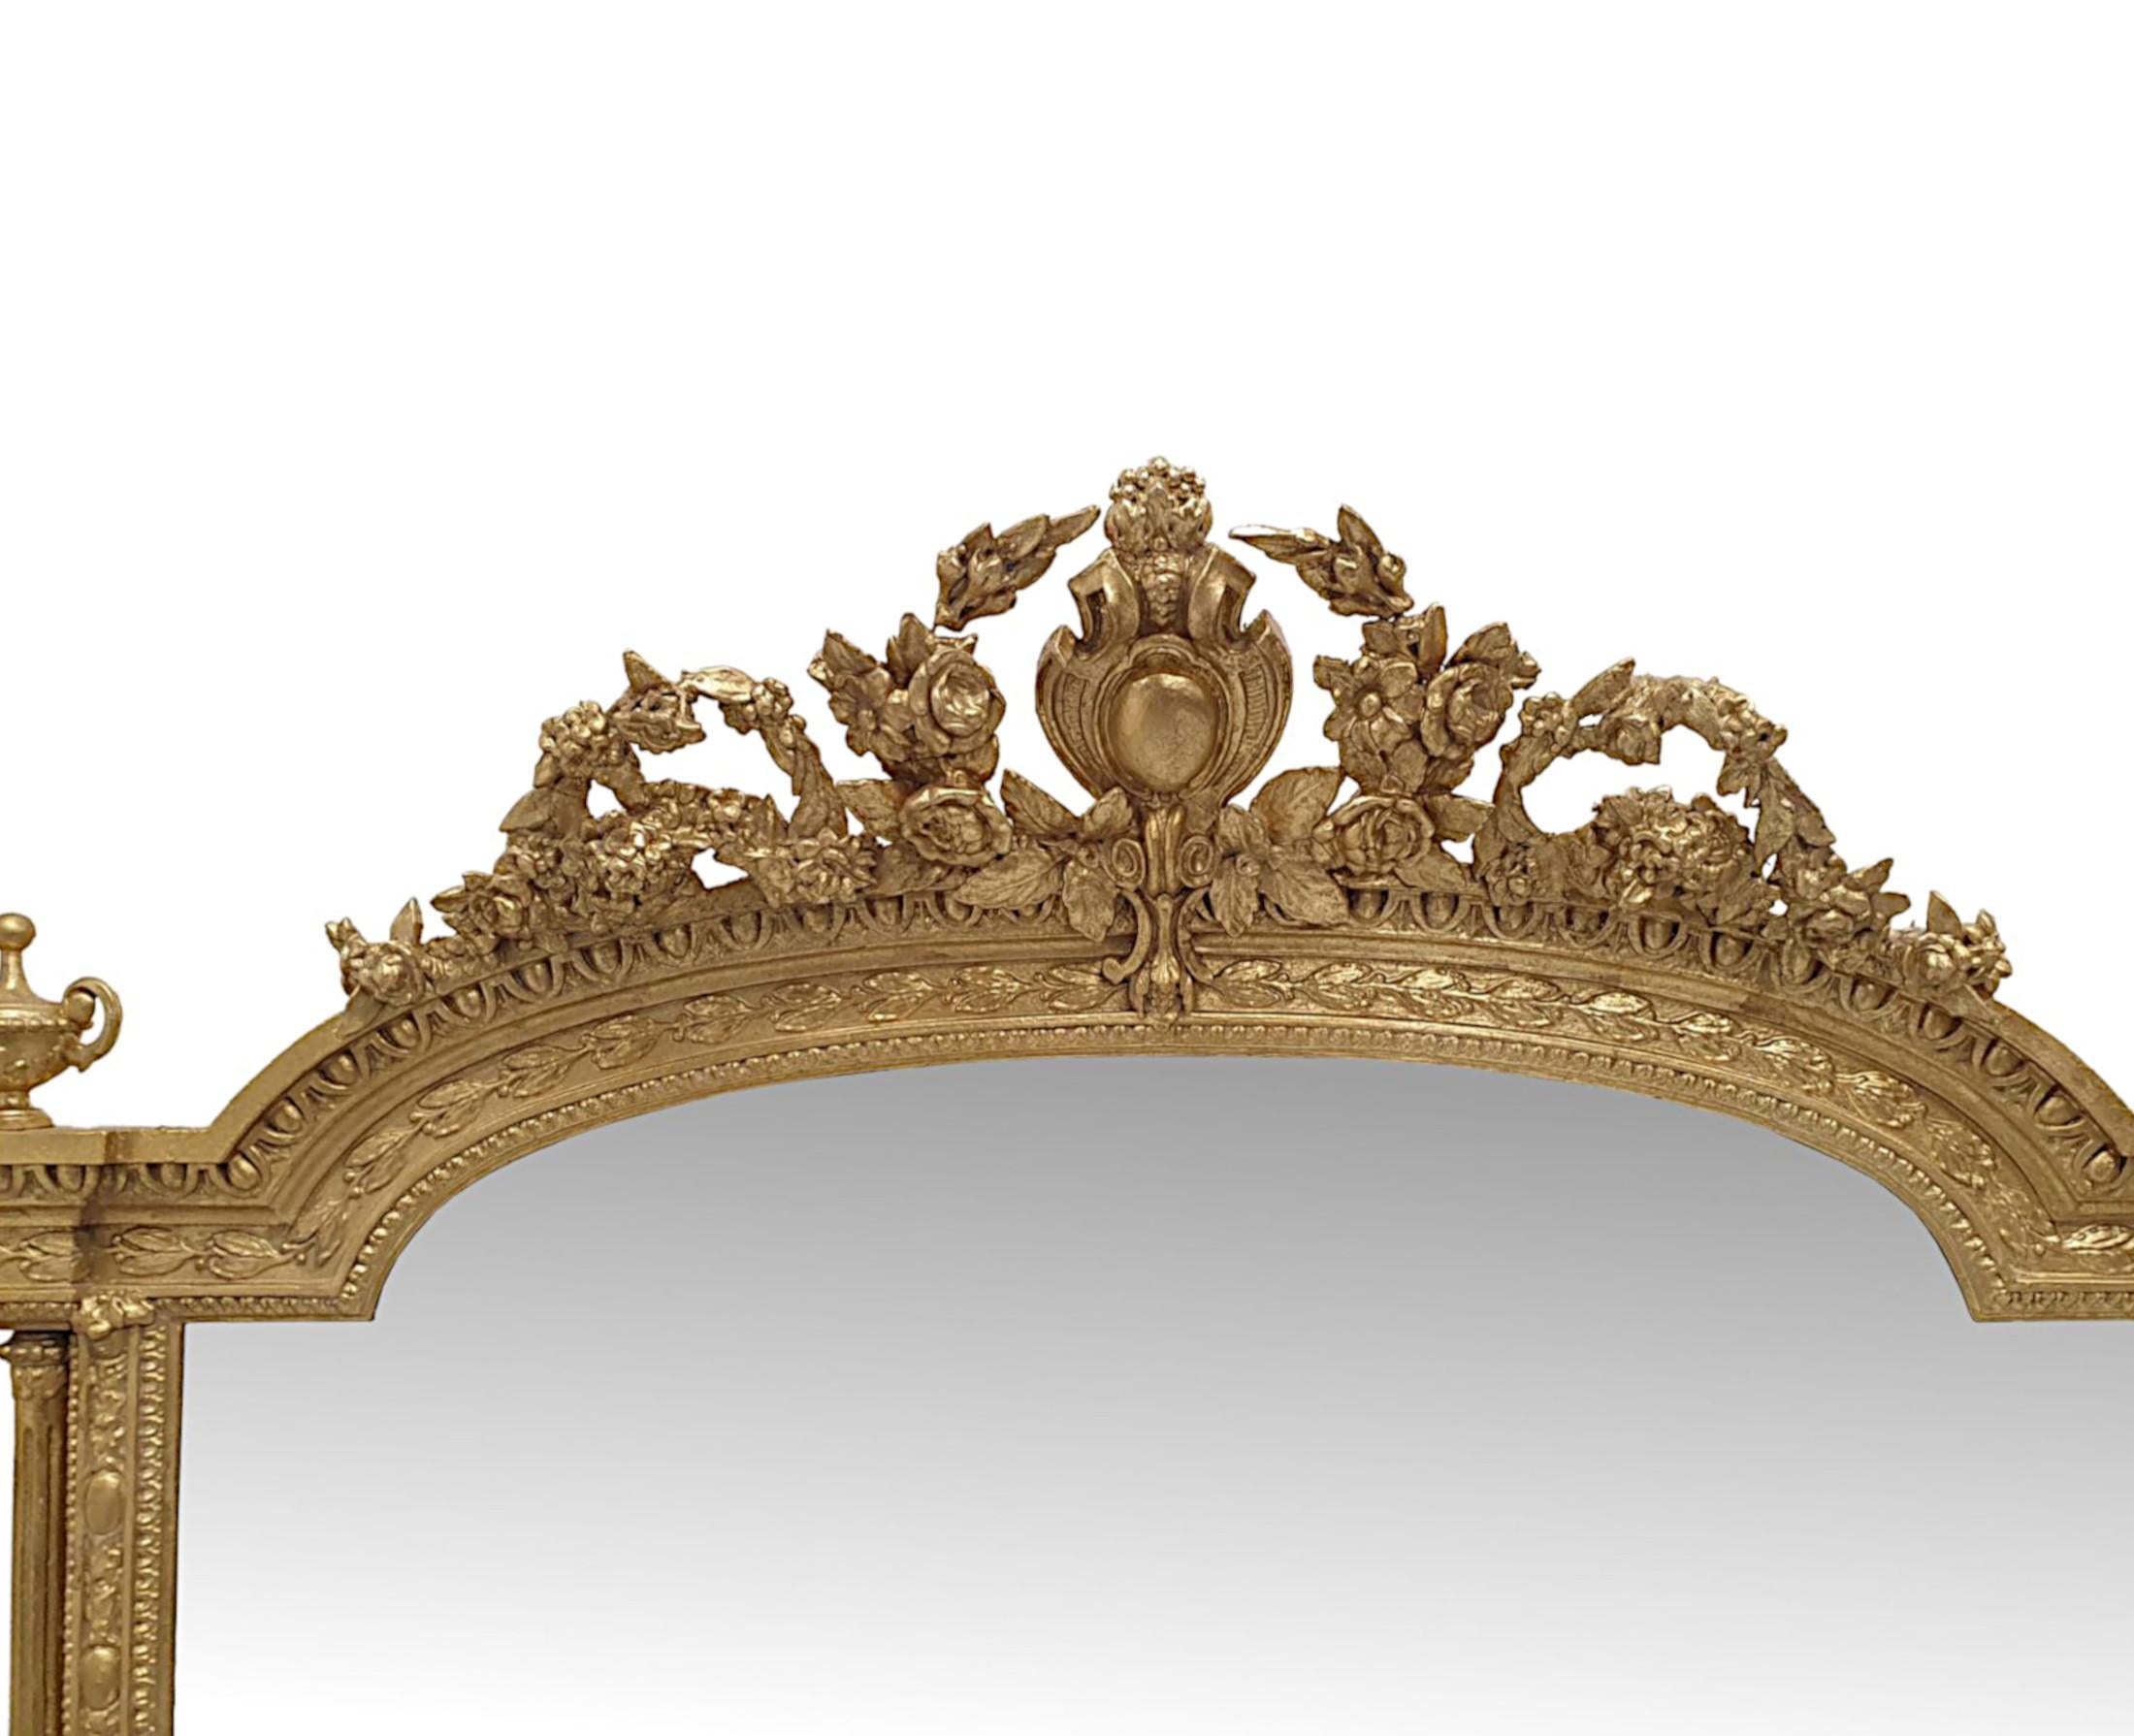 A very rare and impressive 19th Century giltwood overmantle mirror of grand proportions.  The mirror glass plate of rectangular form with curved top is set within a finely hand carved moulded and fluted giltwood frame with elegantly simple